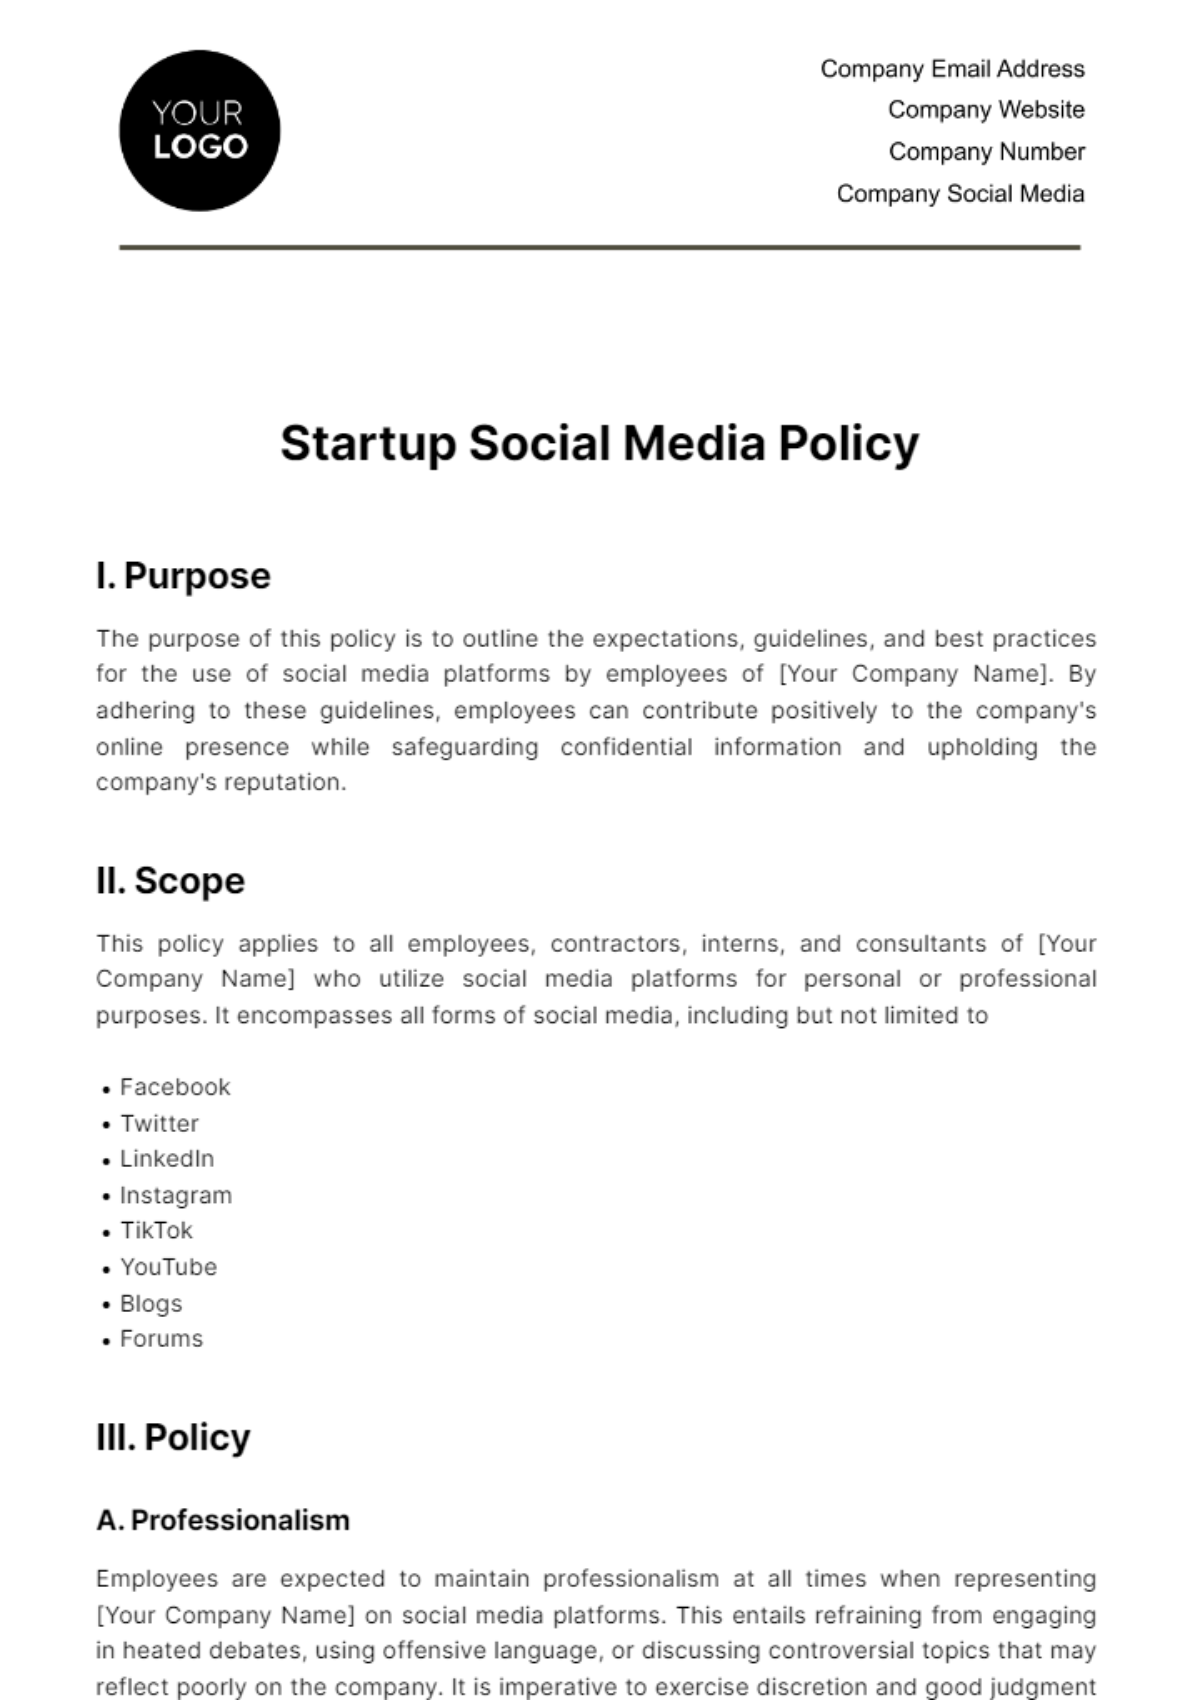 Free Startup Social Media Policy Template